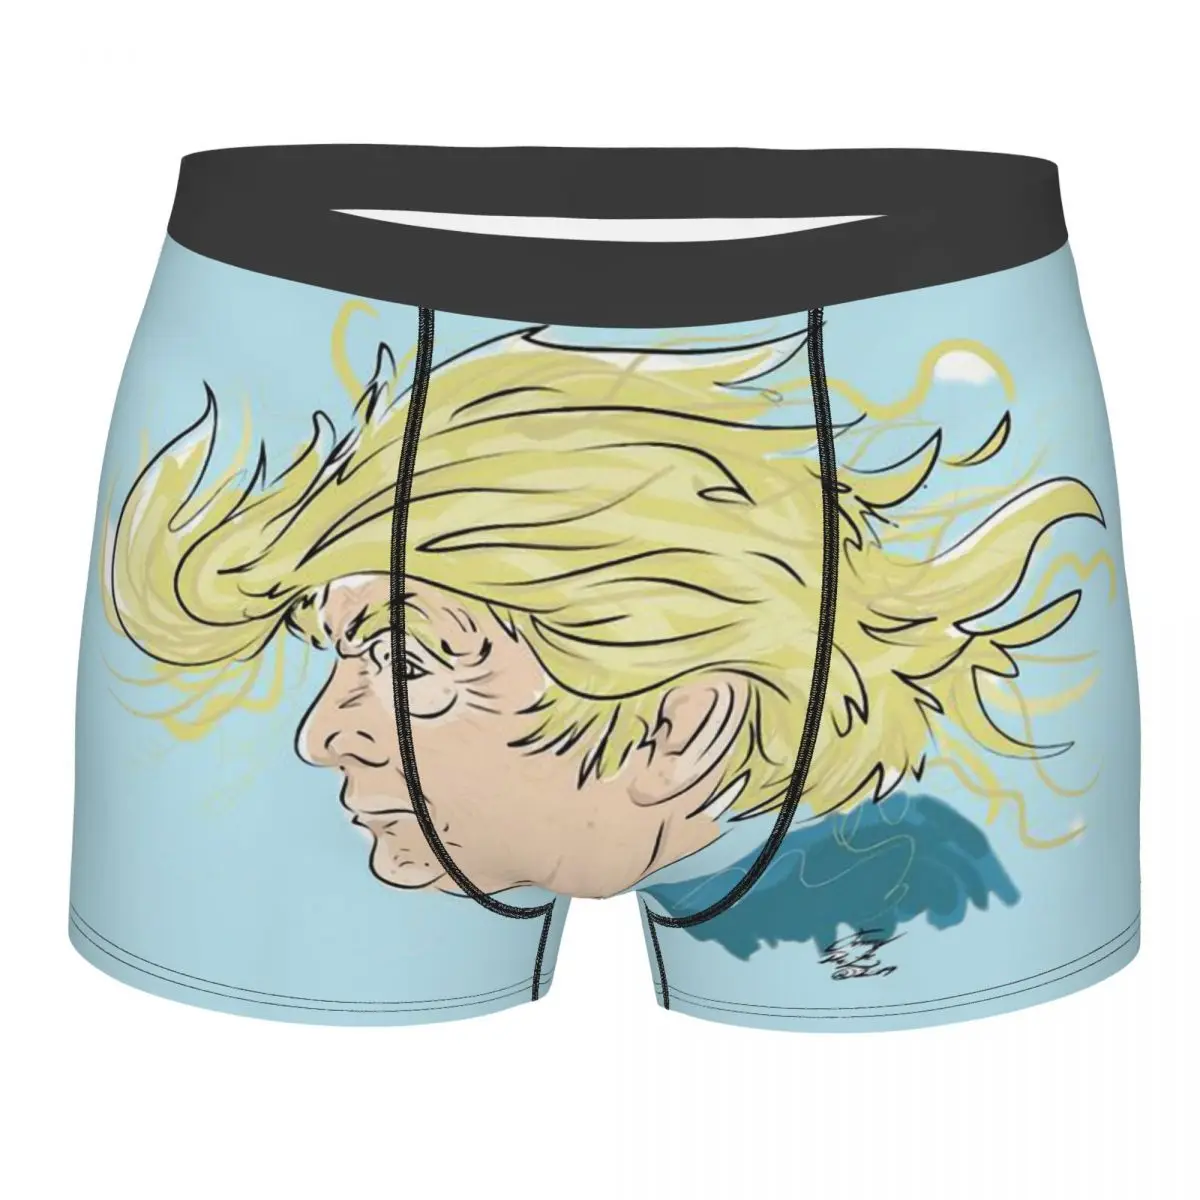 Donald Trump Cartoon Men Underwear, Highly Breathable printing Top Quality Gift Idea